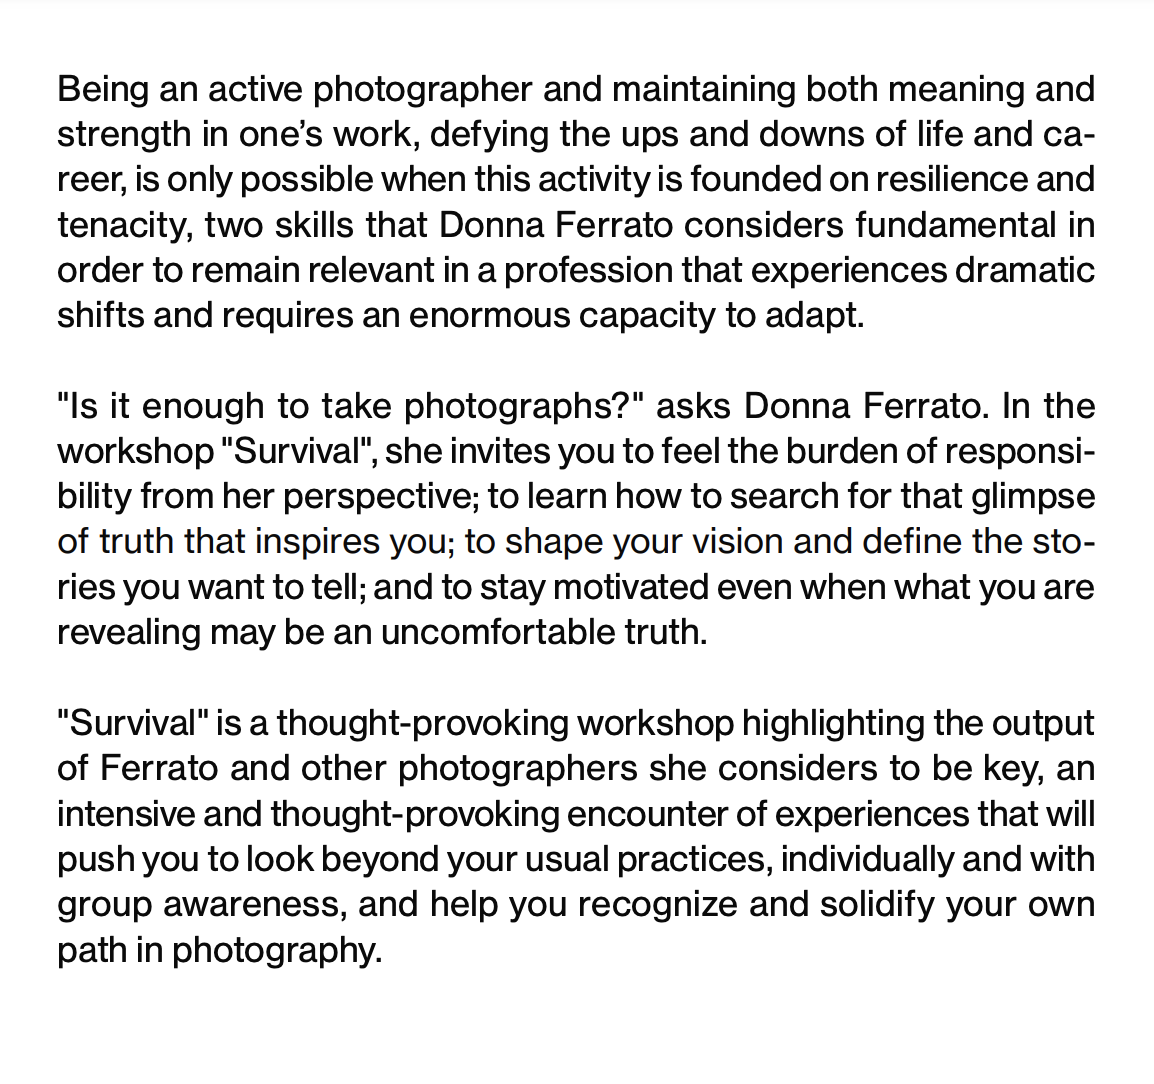 SURVIVAL: Photography Workshop with Donna Ferrato in Barcelona